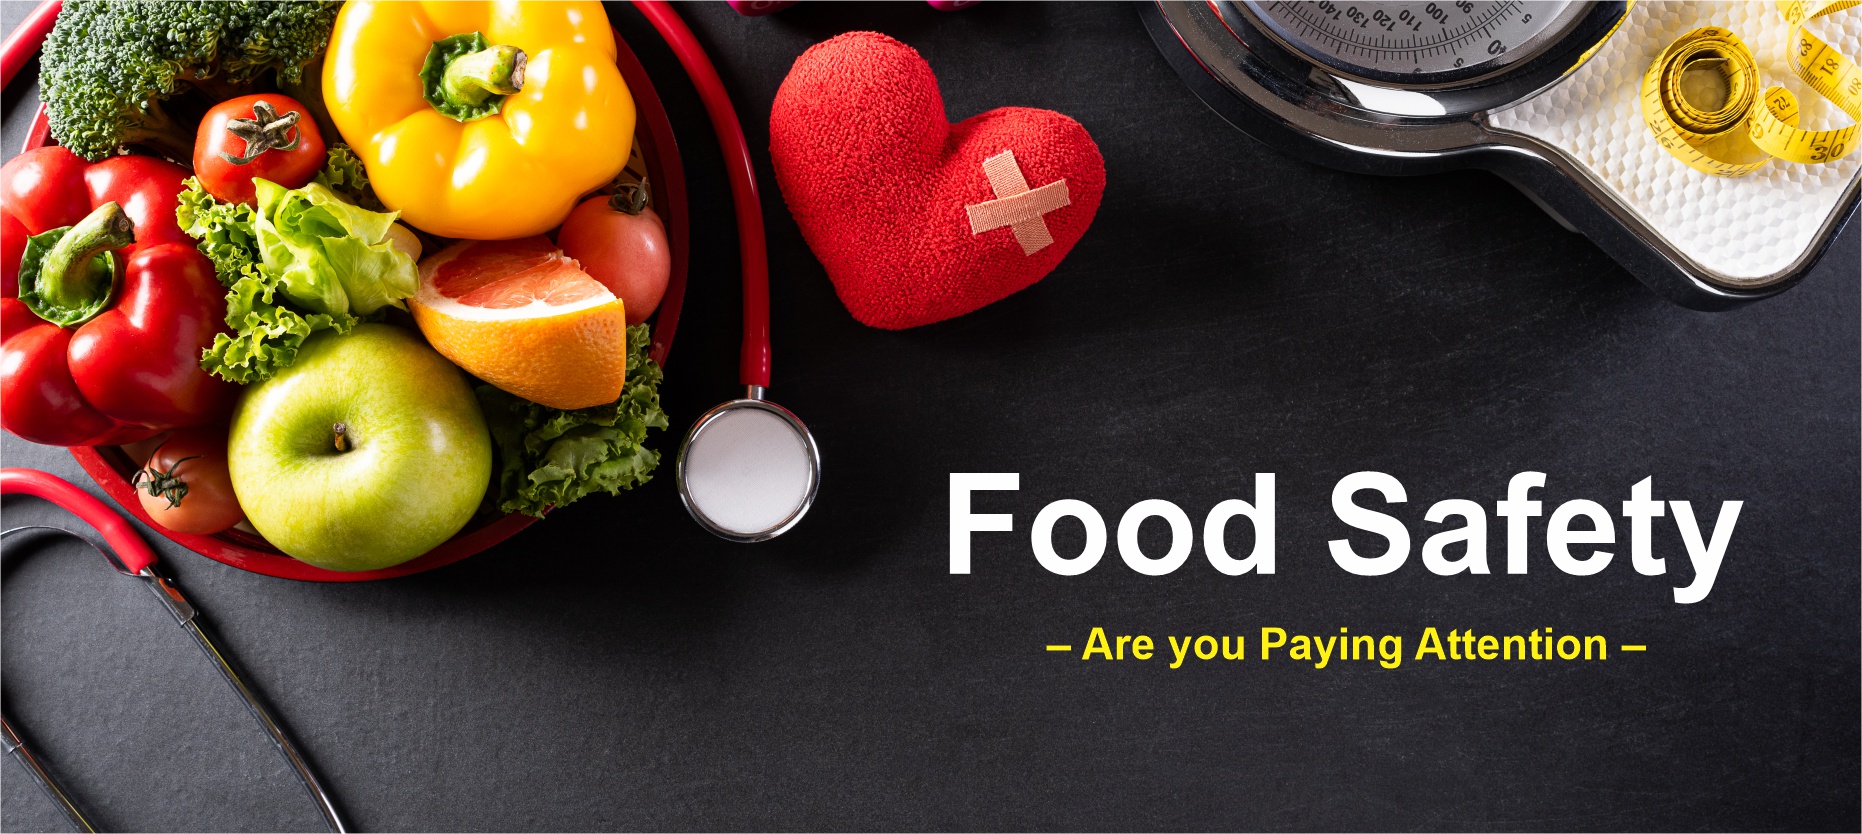 Food Safety – Are you Paying Attention